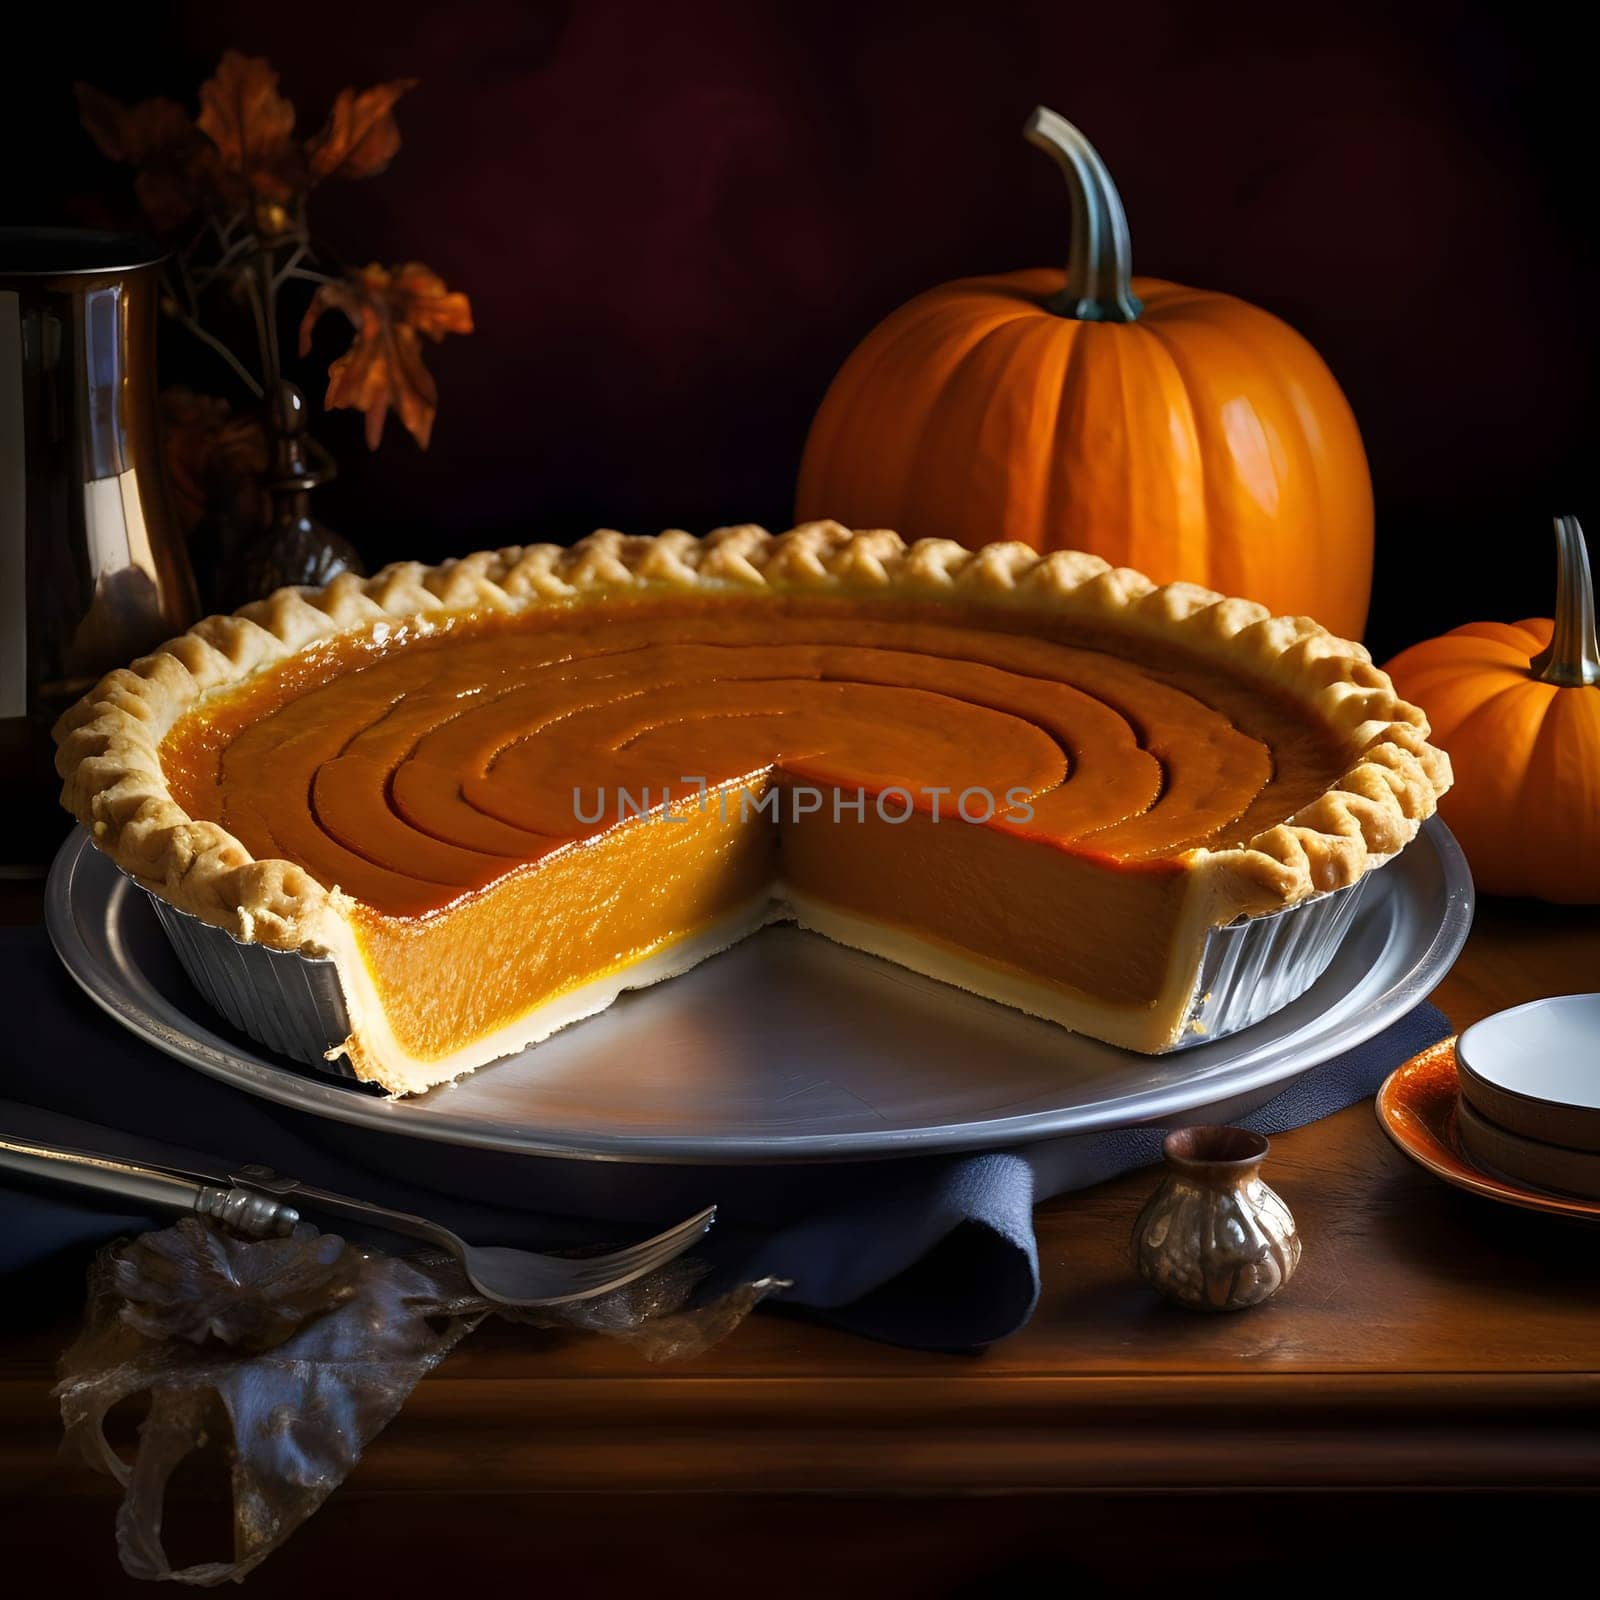 Pumpkin cake on a plate next to pumpkin cutlery. Pumpkin as a dish of thanksgiving for the harvest. An atmosphere of joy and celebration.